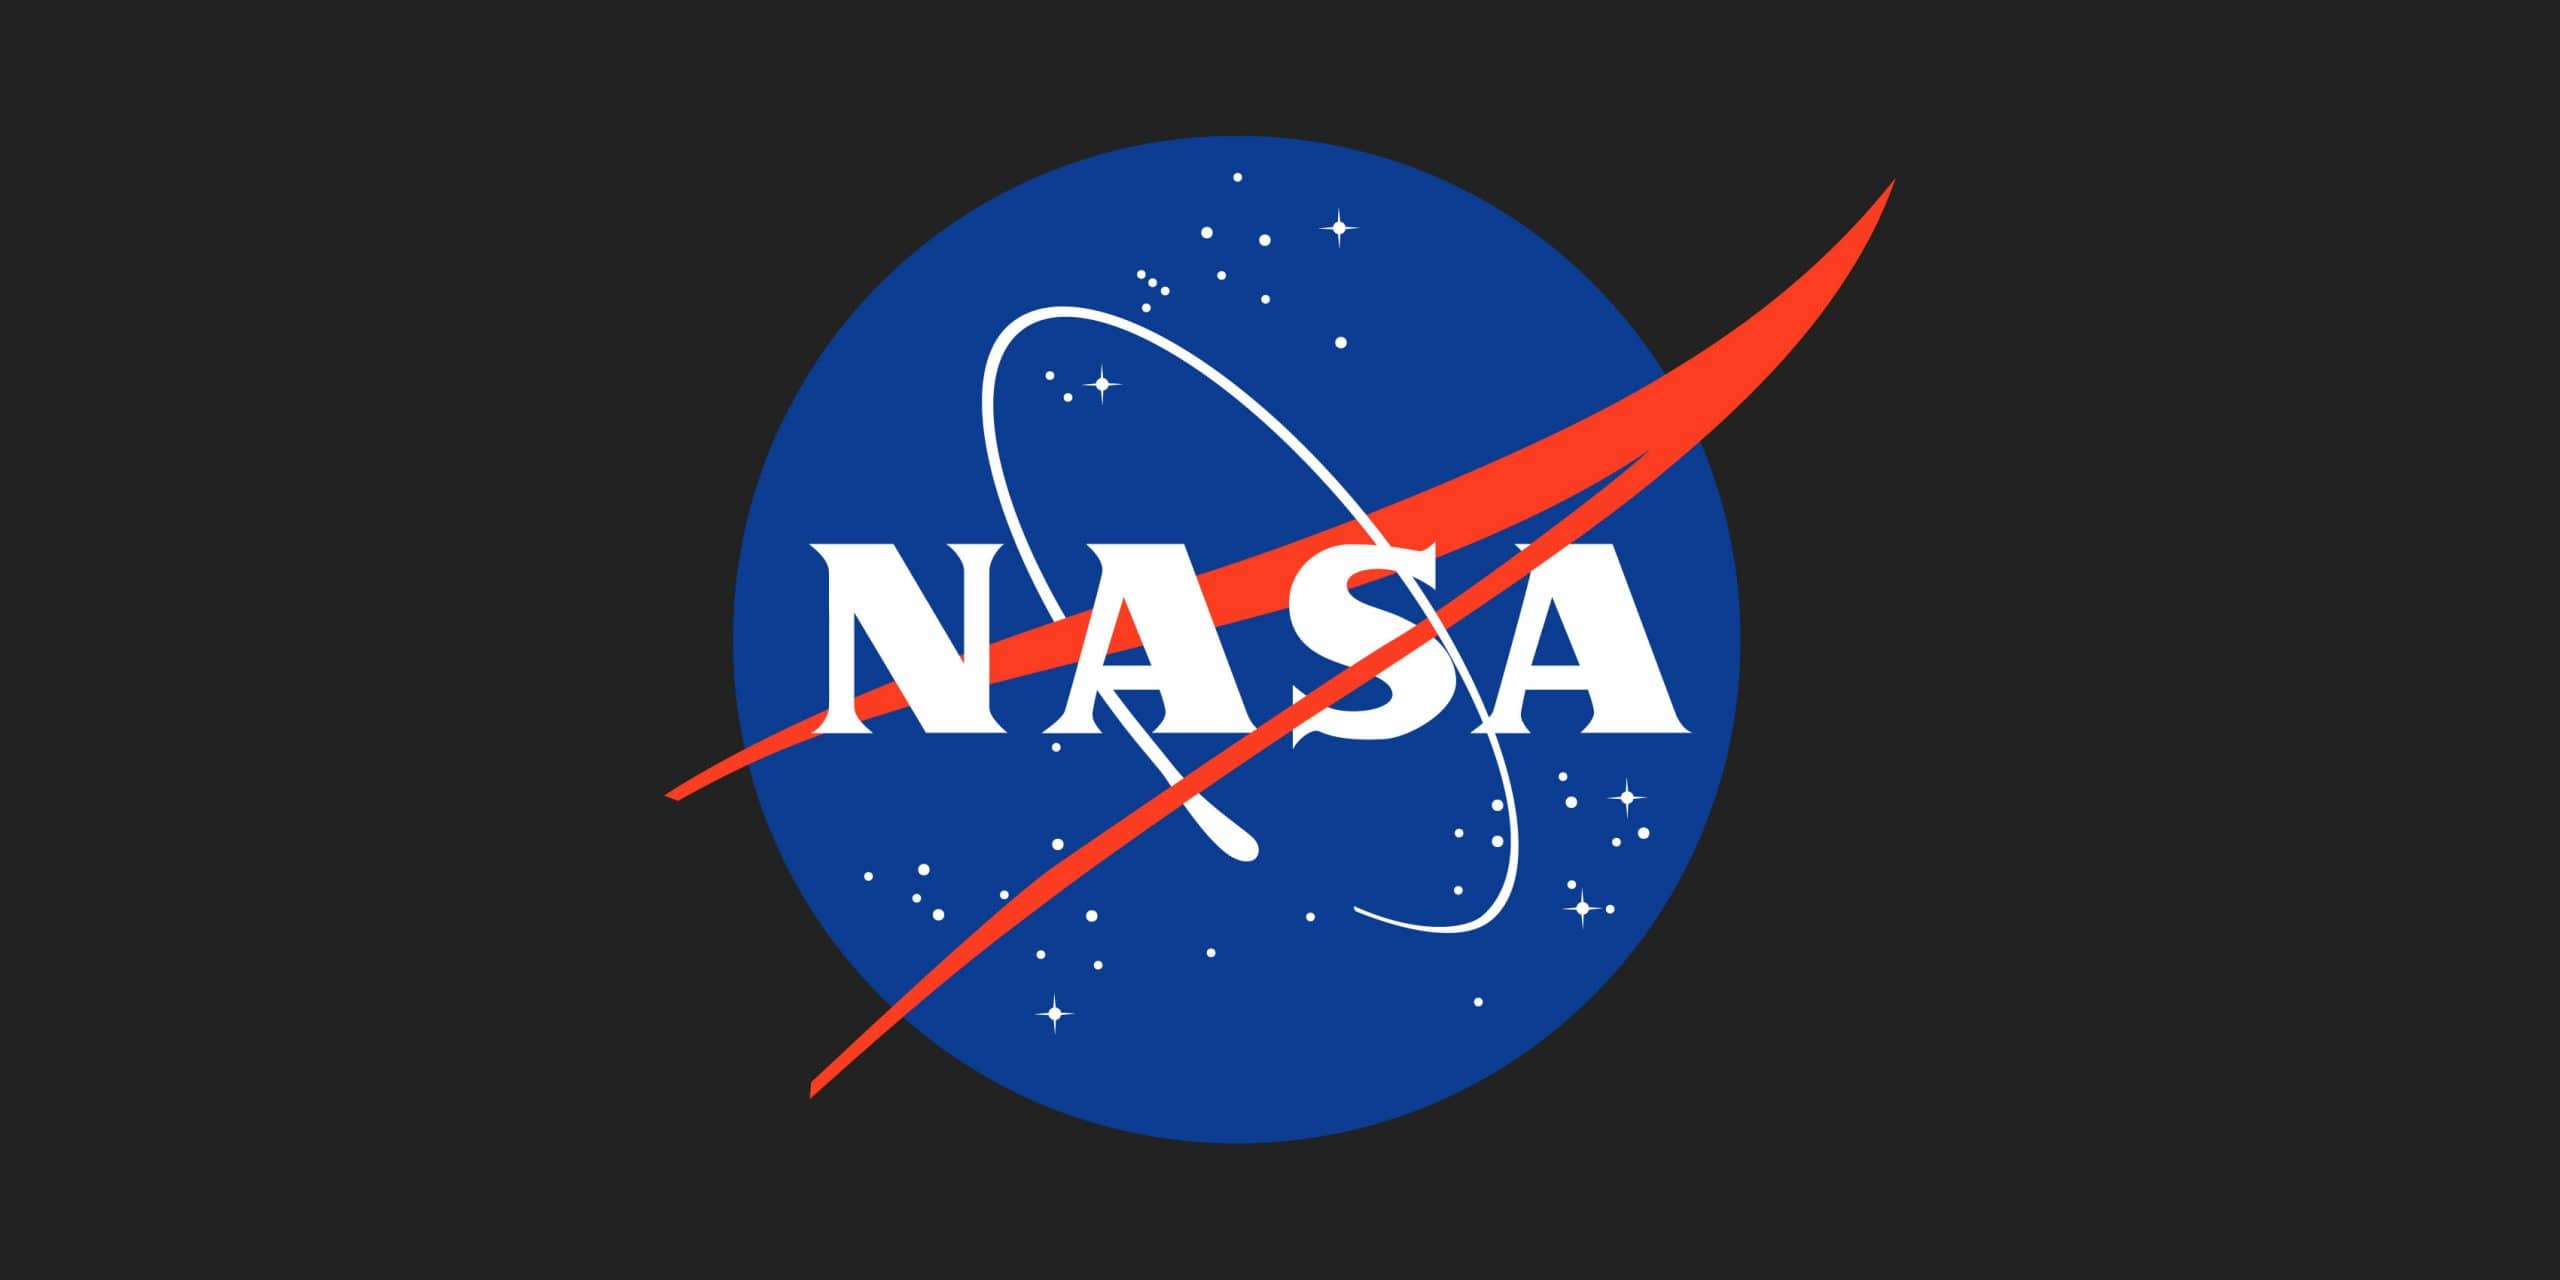 NASA employs a specialist in crypto and blockchain technology